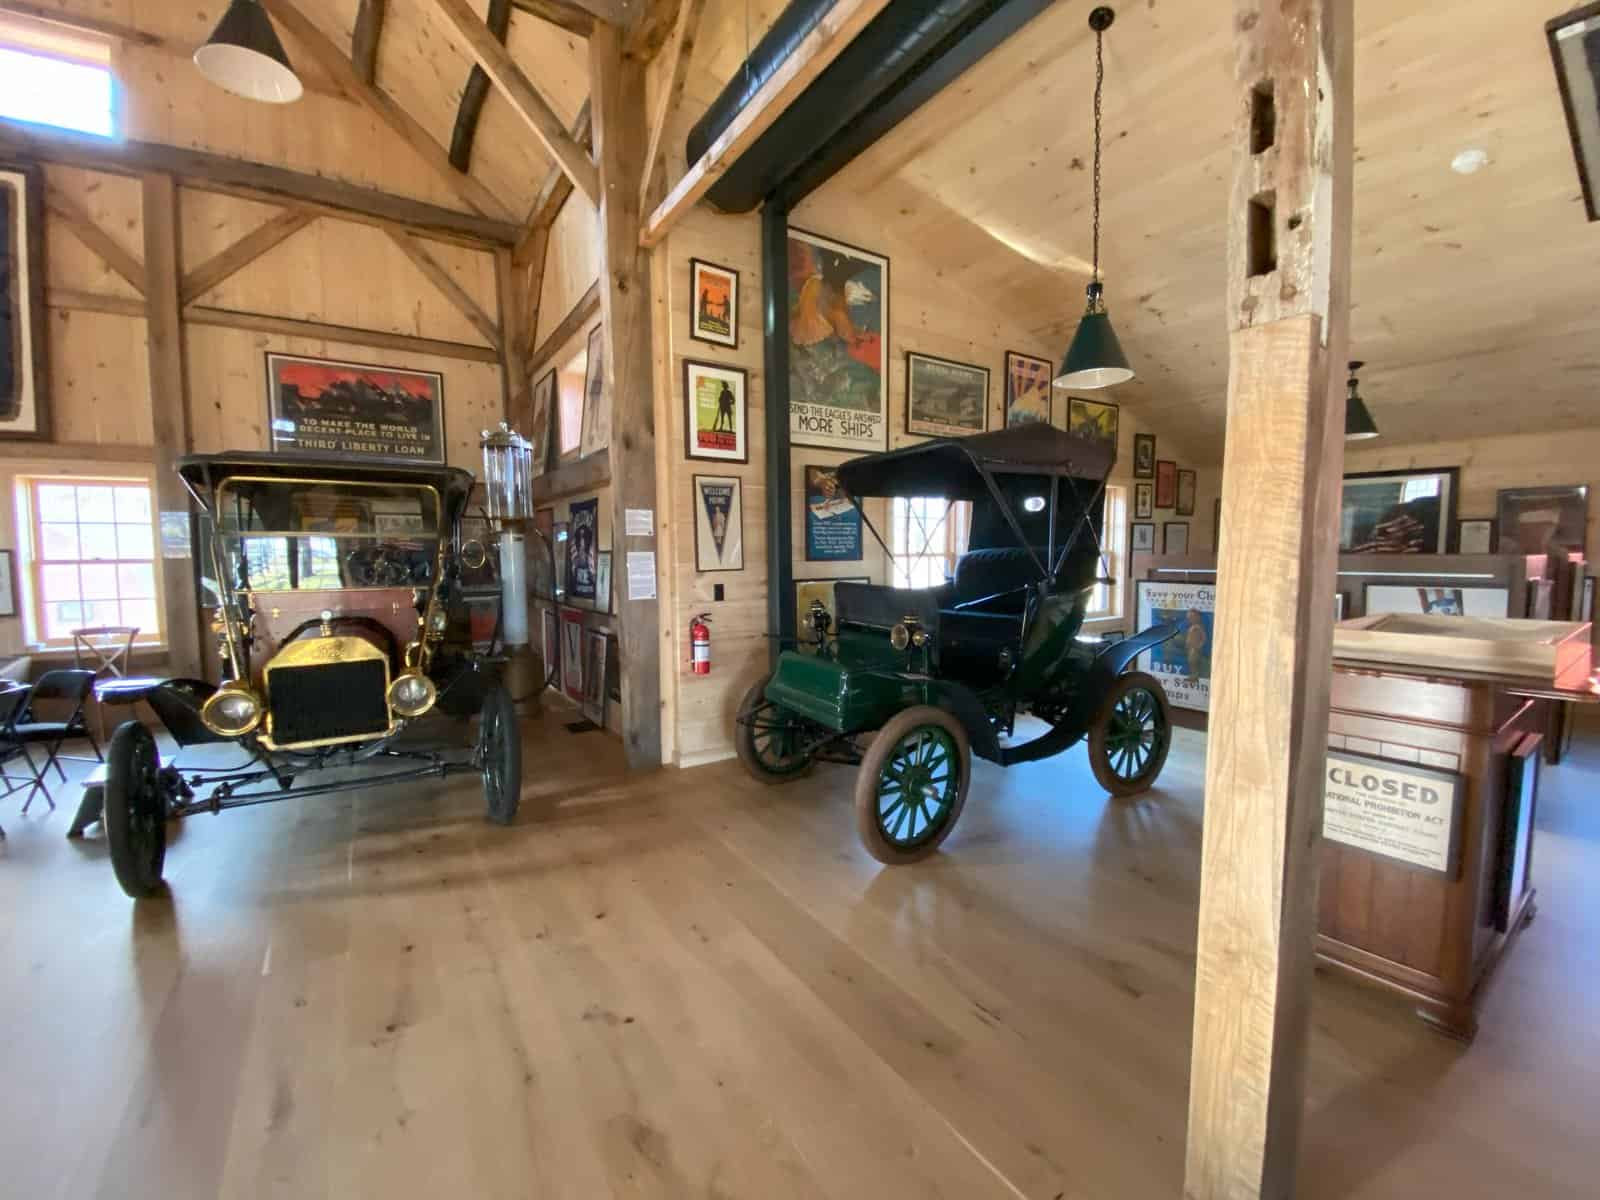 The homeowners use the barn to display their private collection of American artifacts.